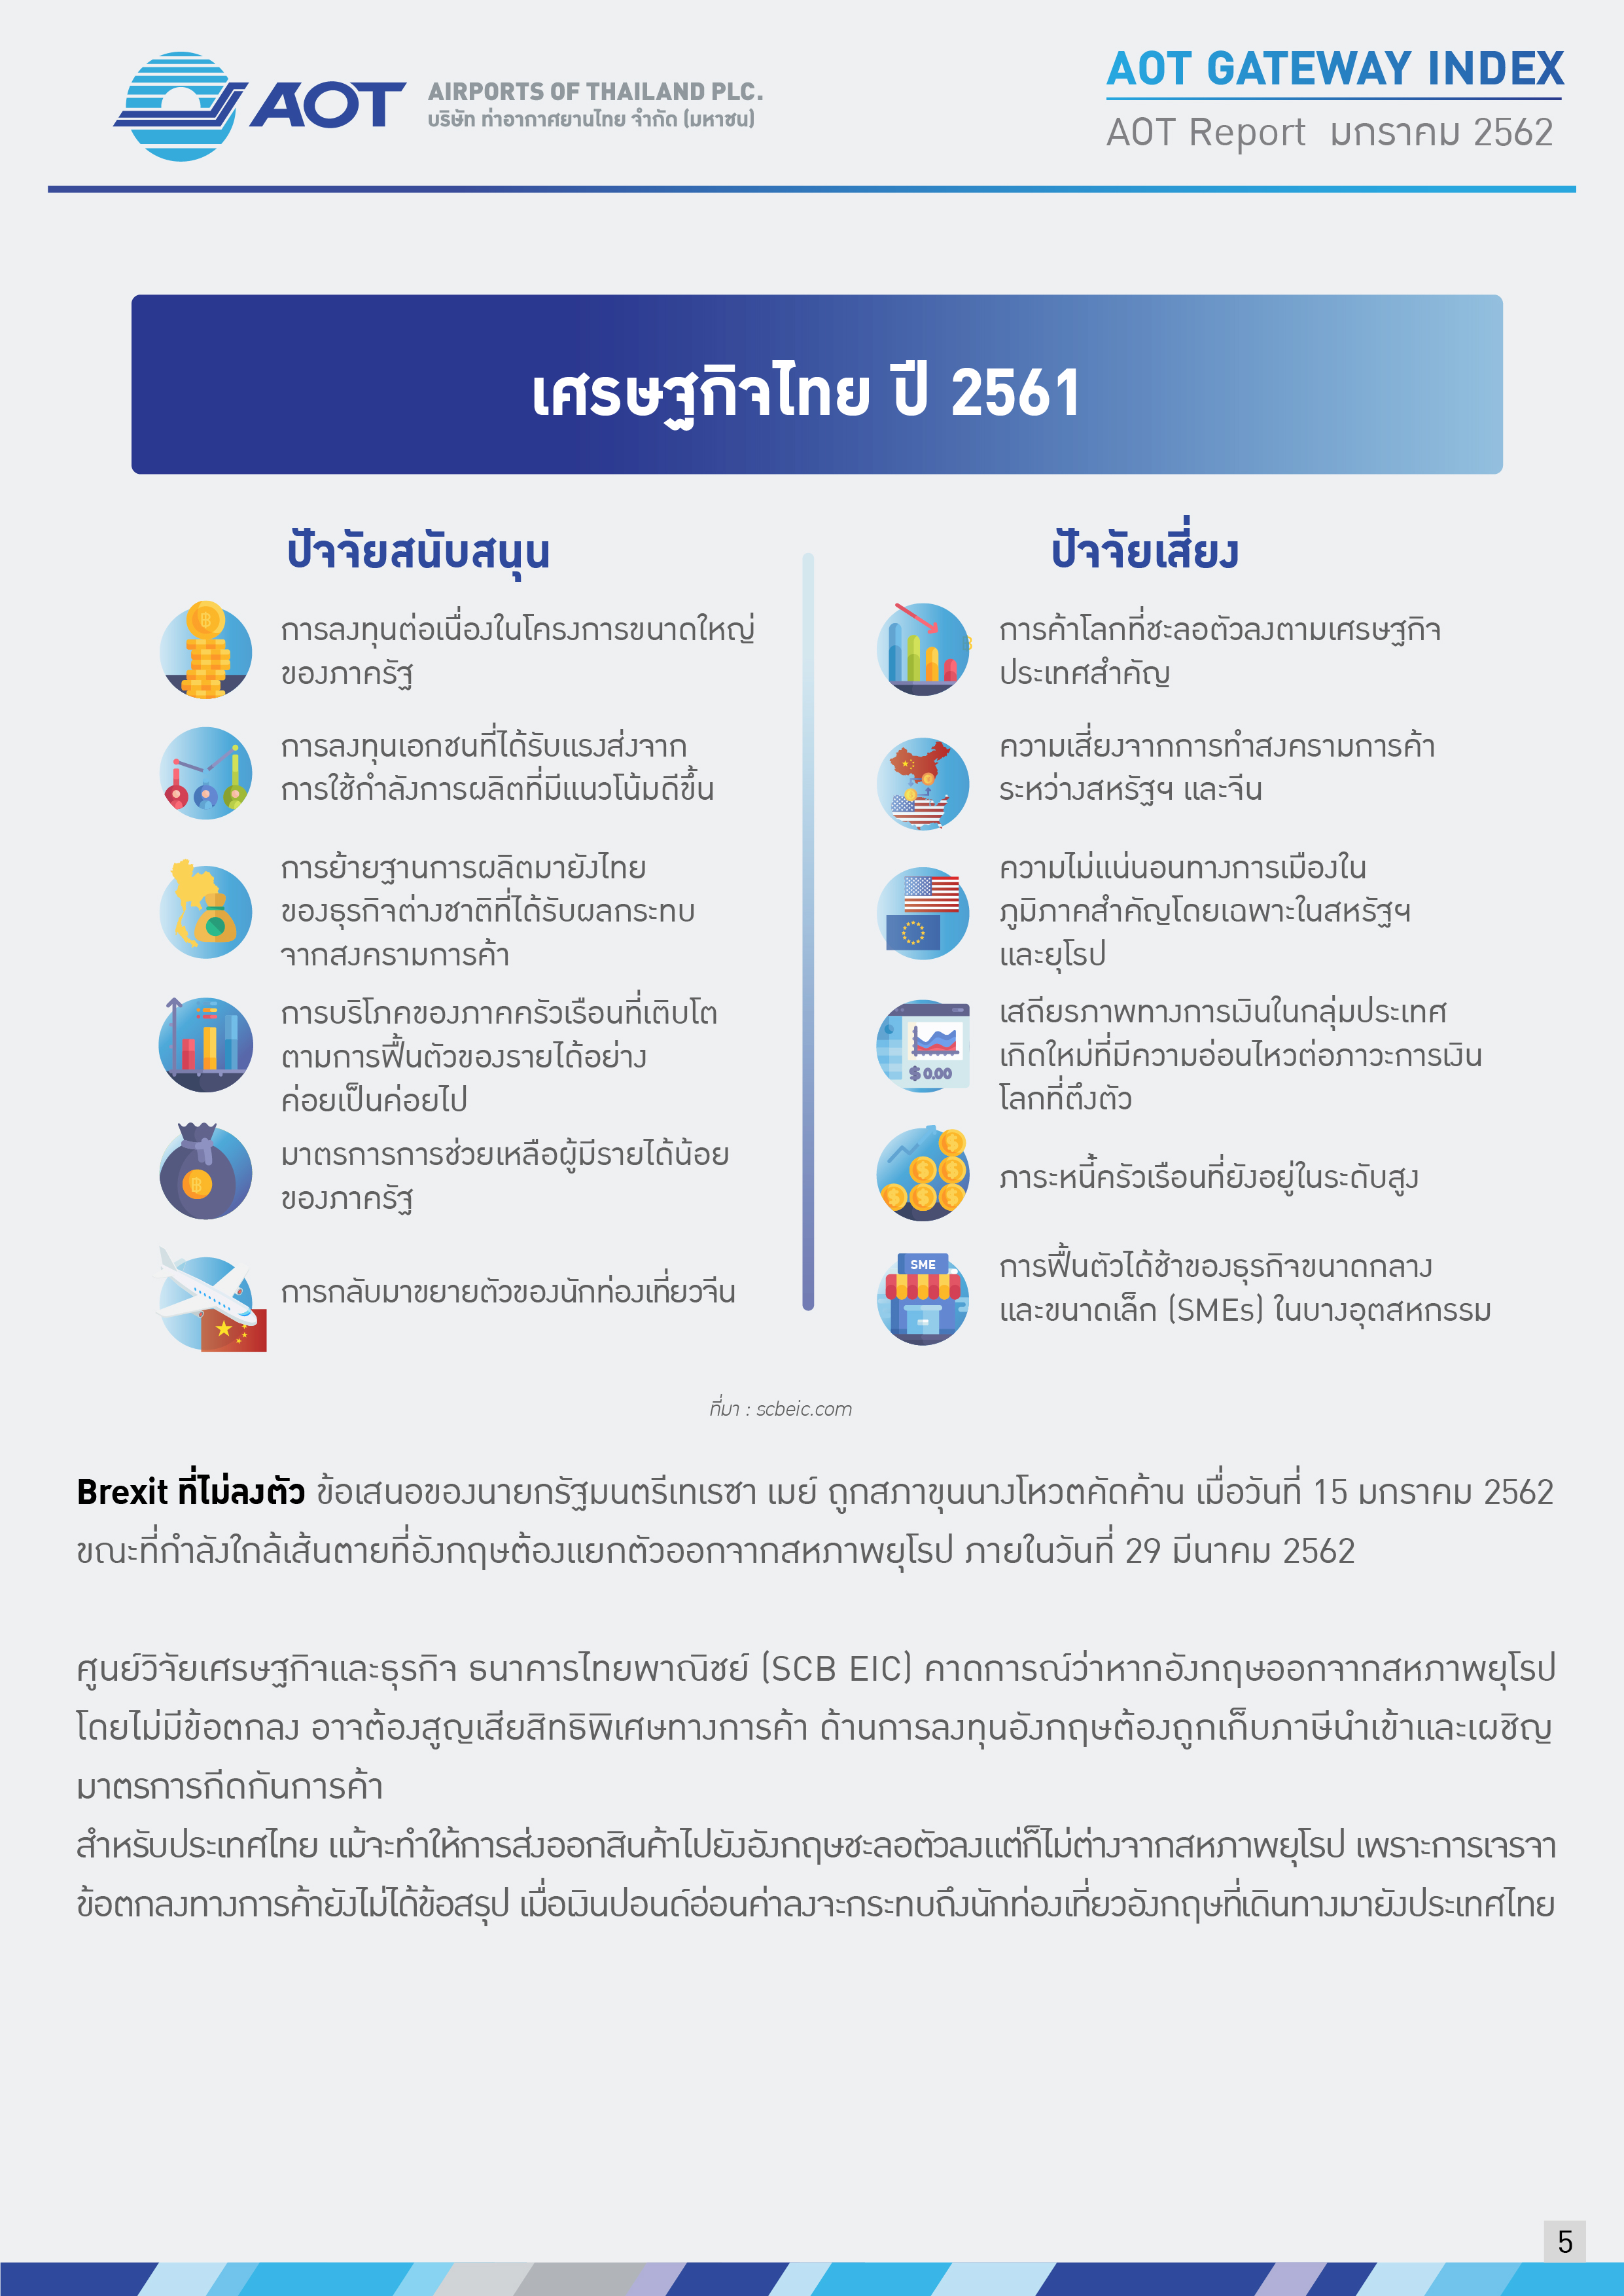 AOTcontent2019_Index_02_เศรษฐกิจโลก_V5_20190401_Page05